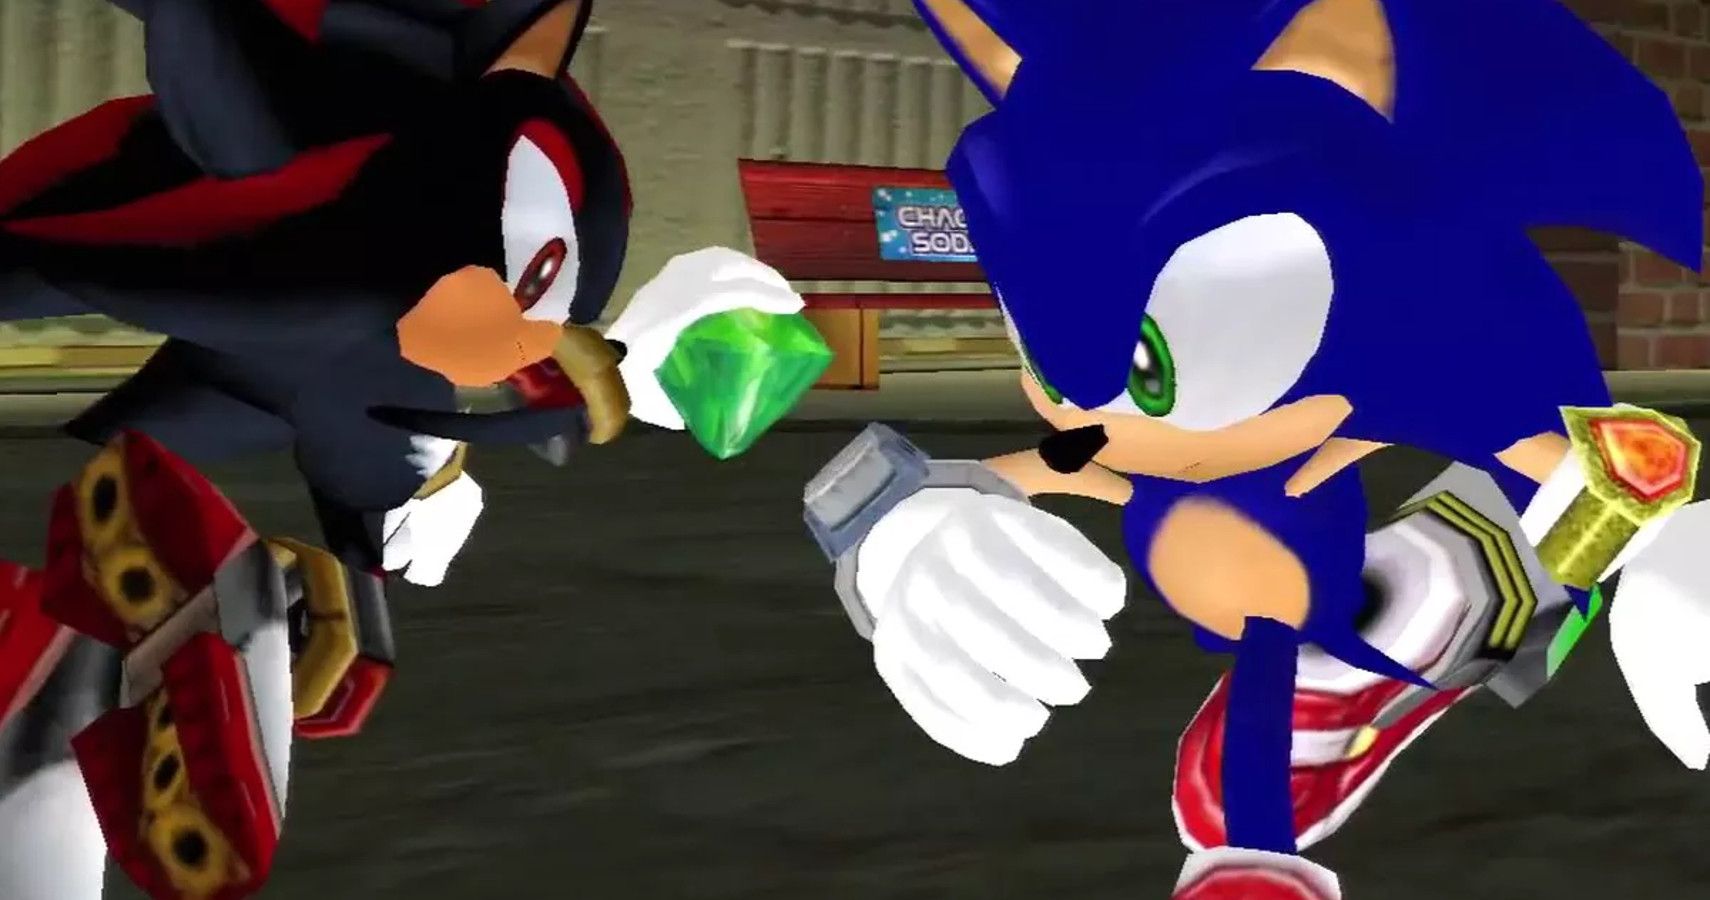 sonic the hedgehog during games for free